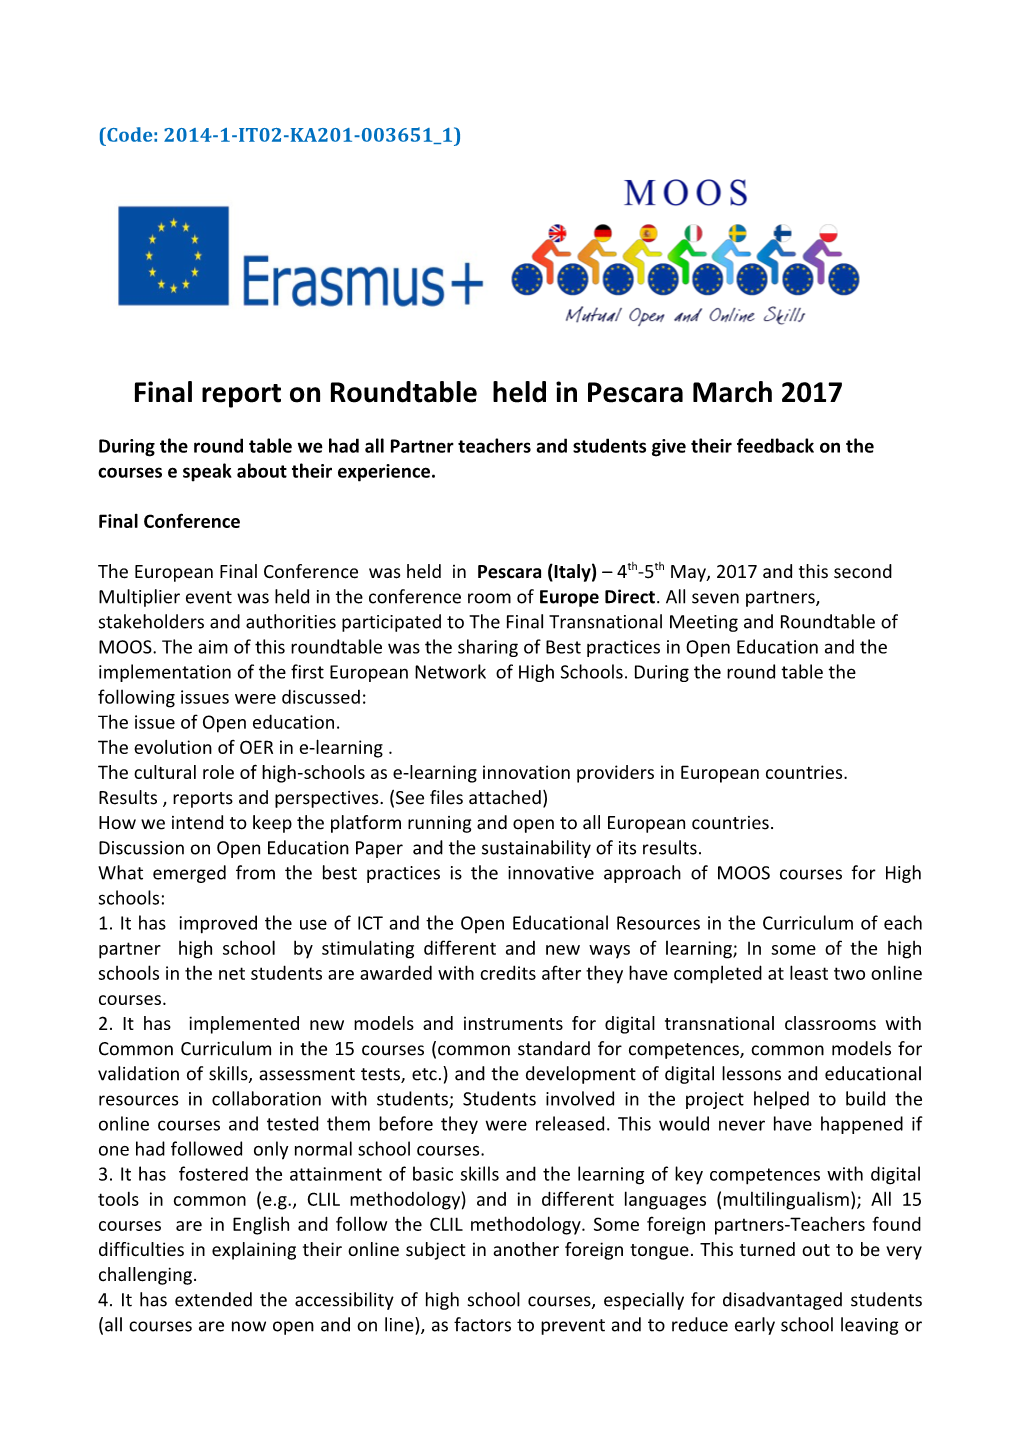 Final Report on Roundtable Held in Pescara March 2017